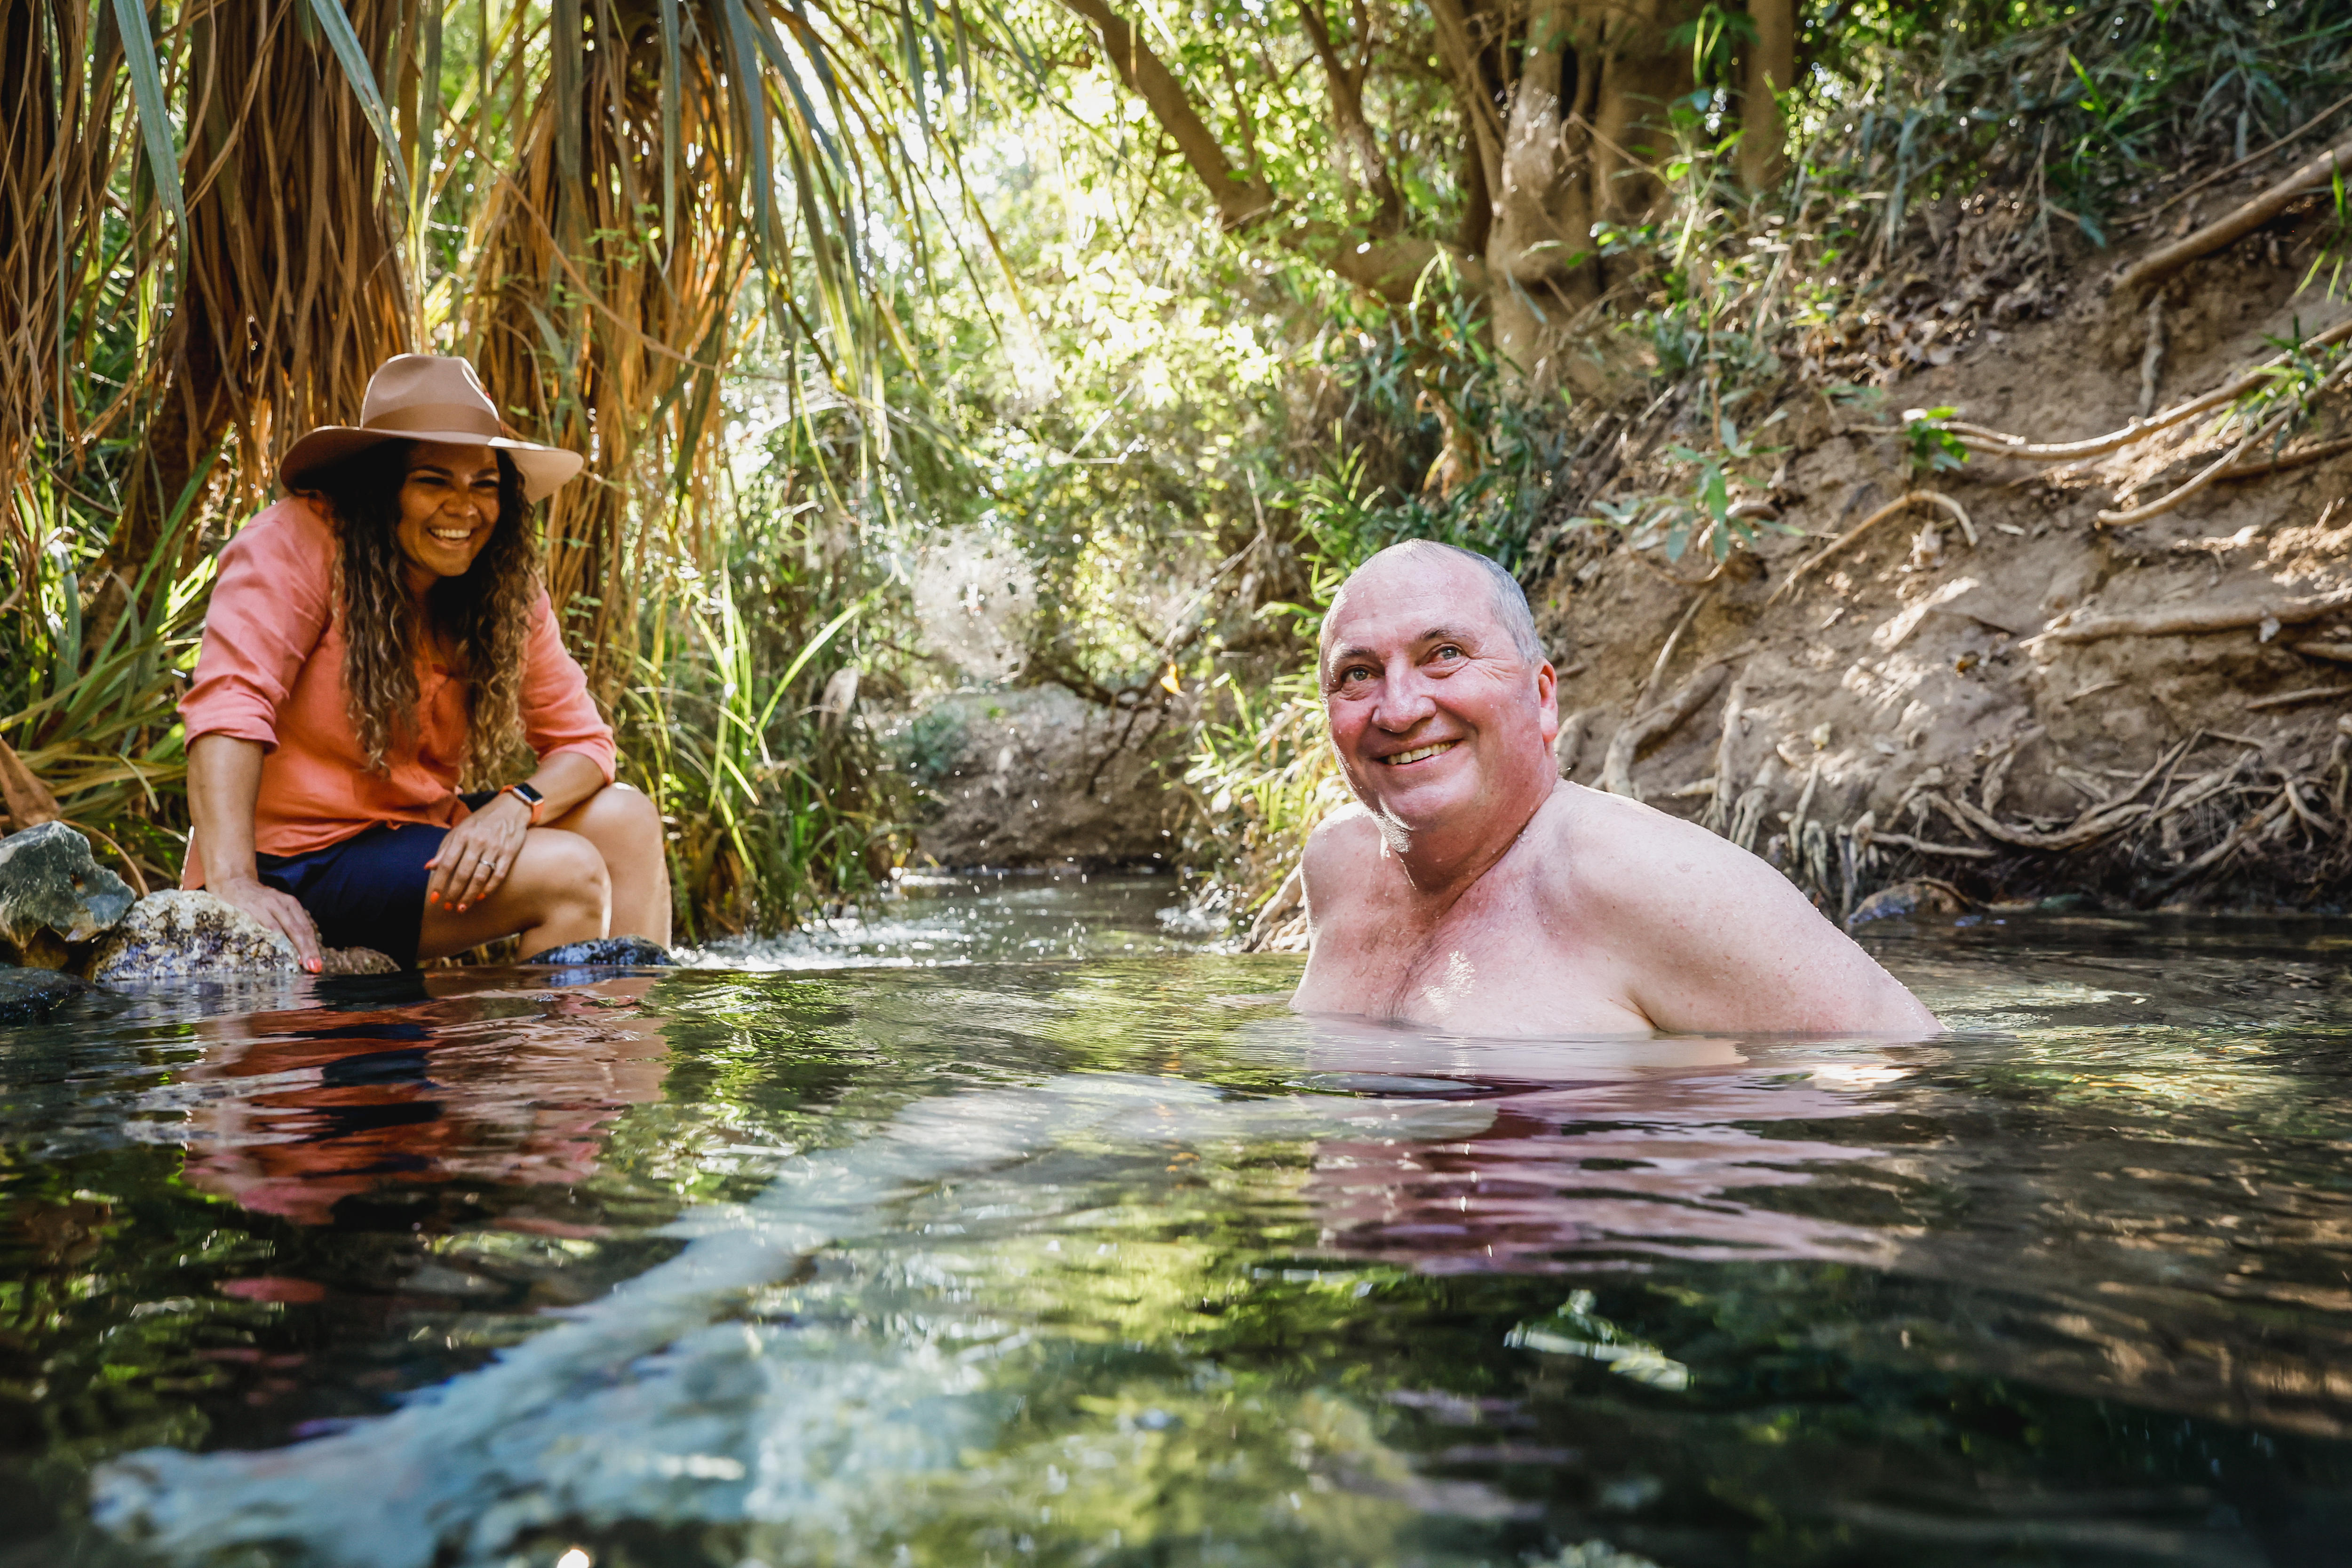 A man sits in a freshwater spring while a clothed woman appears to be amused